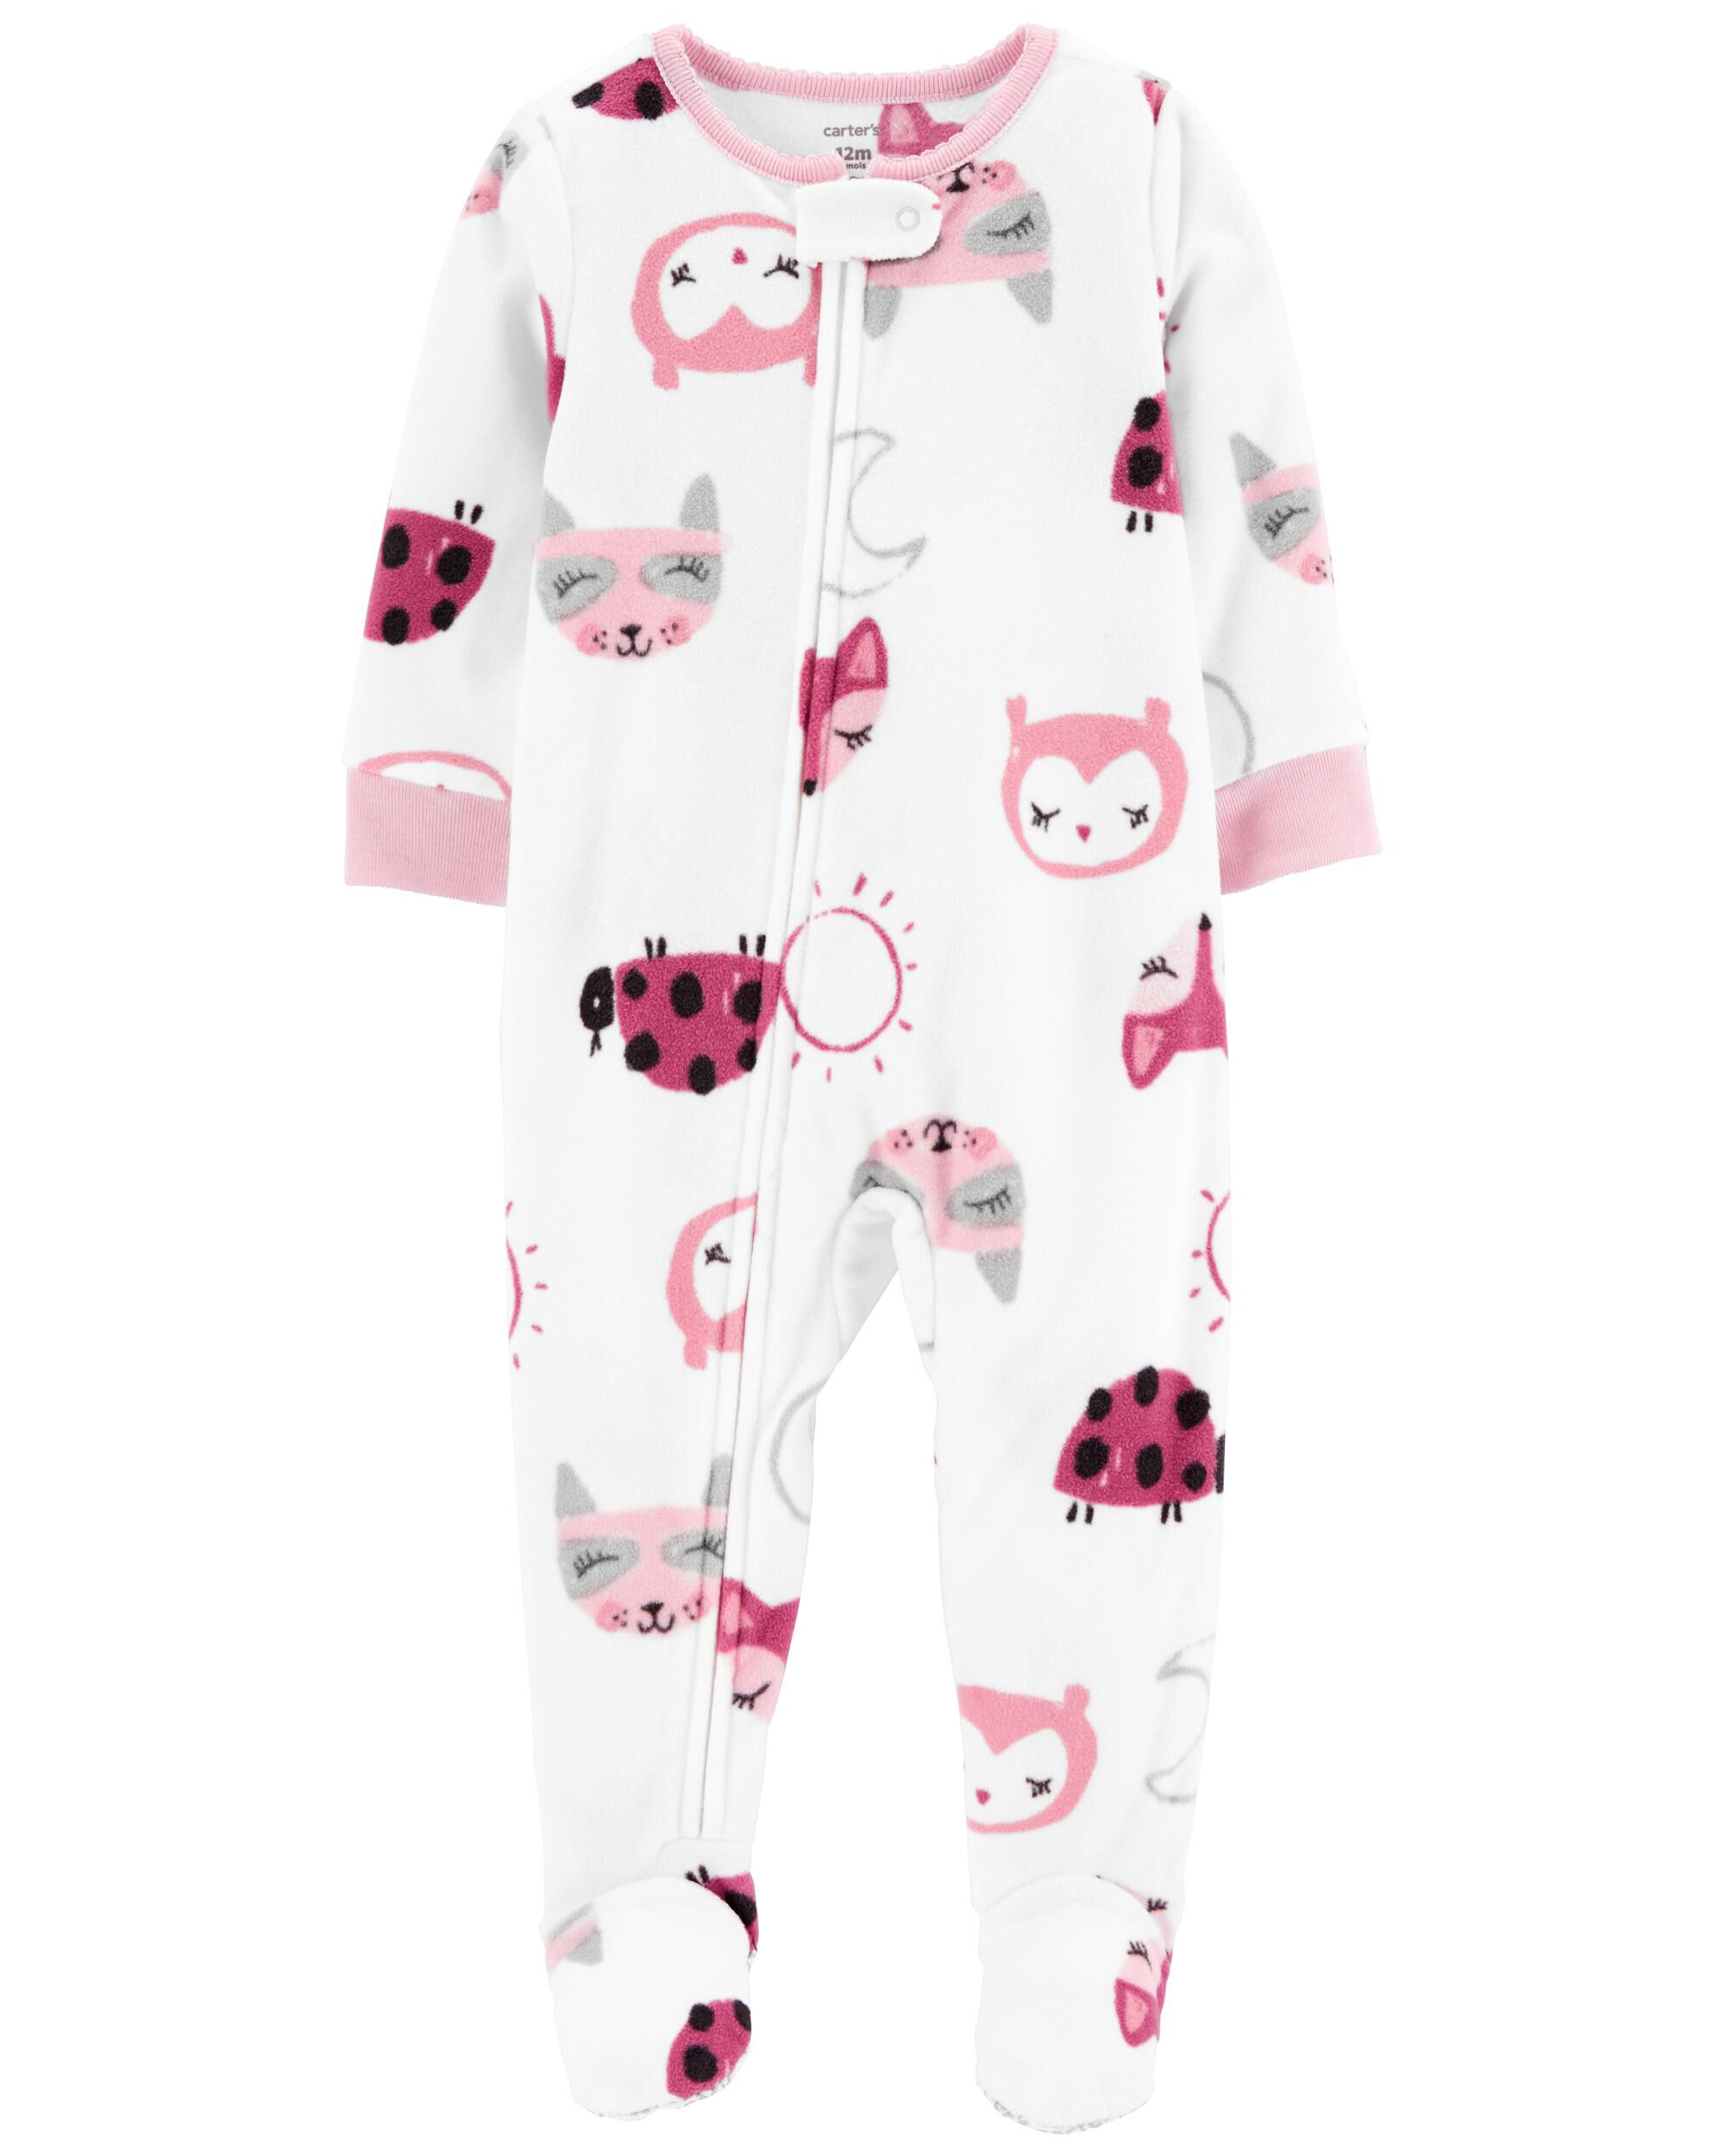 Carters Girls size 4T one piece Footed Pajamas New 